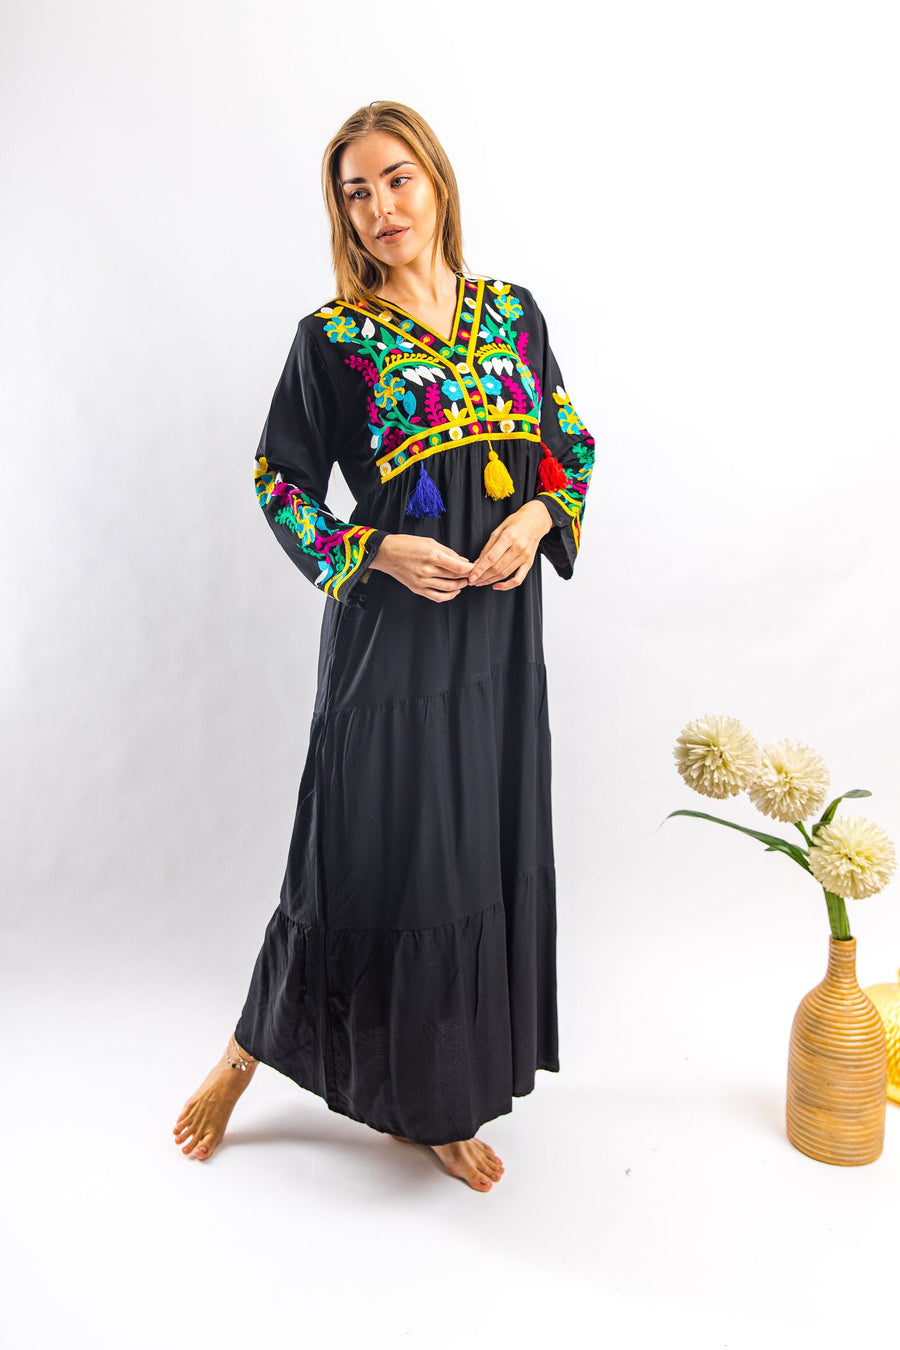 Black embroidered Caftan with tassels, caftans for women, embroidered Caftan dress, Caftan maxi dress, Caftans for women, Caftans